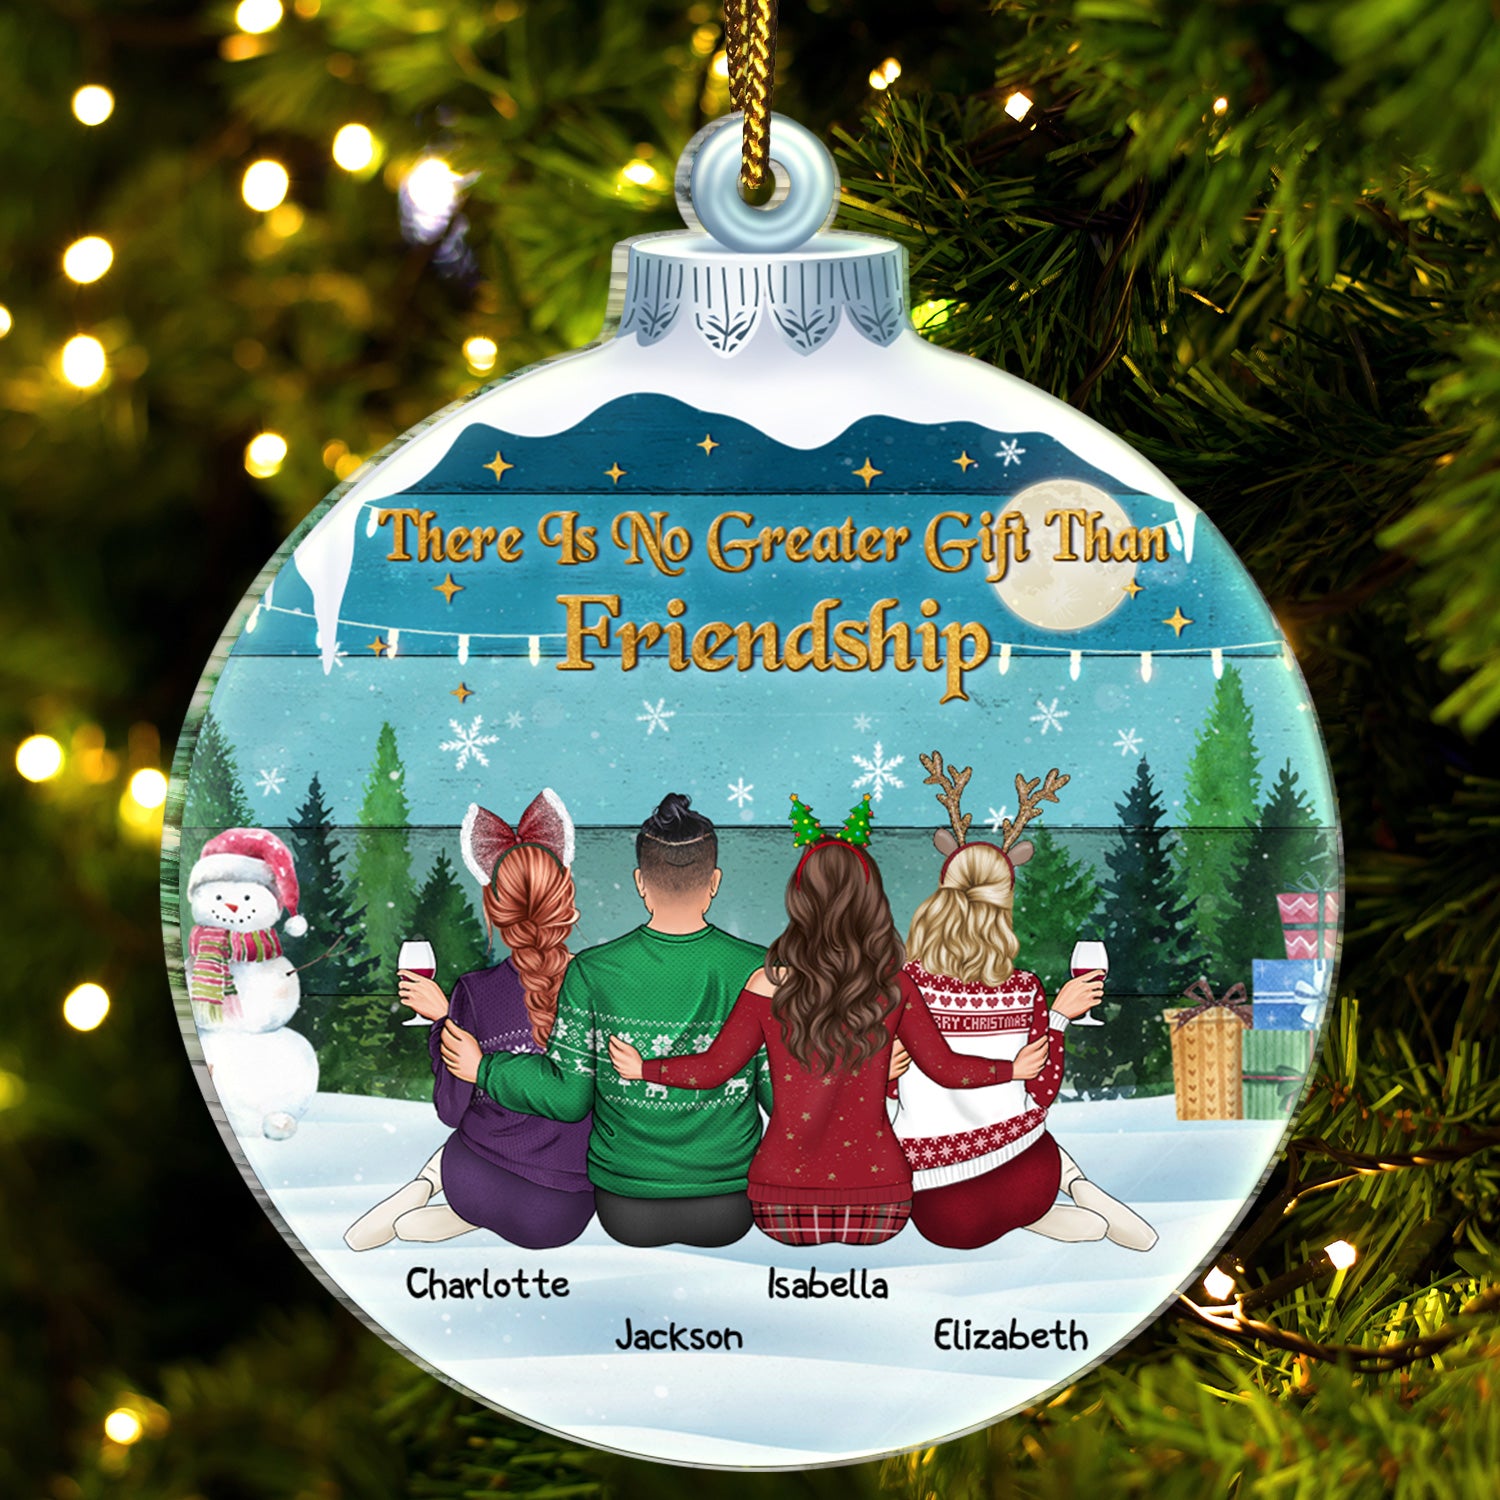 There Is No Greater Gift Than Friendship - Christmas Memorial Gift For Best Friends, Besties, Sisters - Personalized Custom Shaped Acrylic Ornament